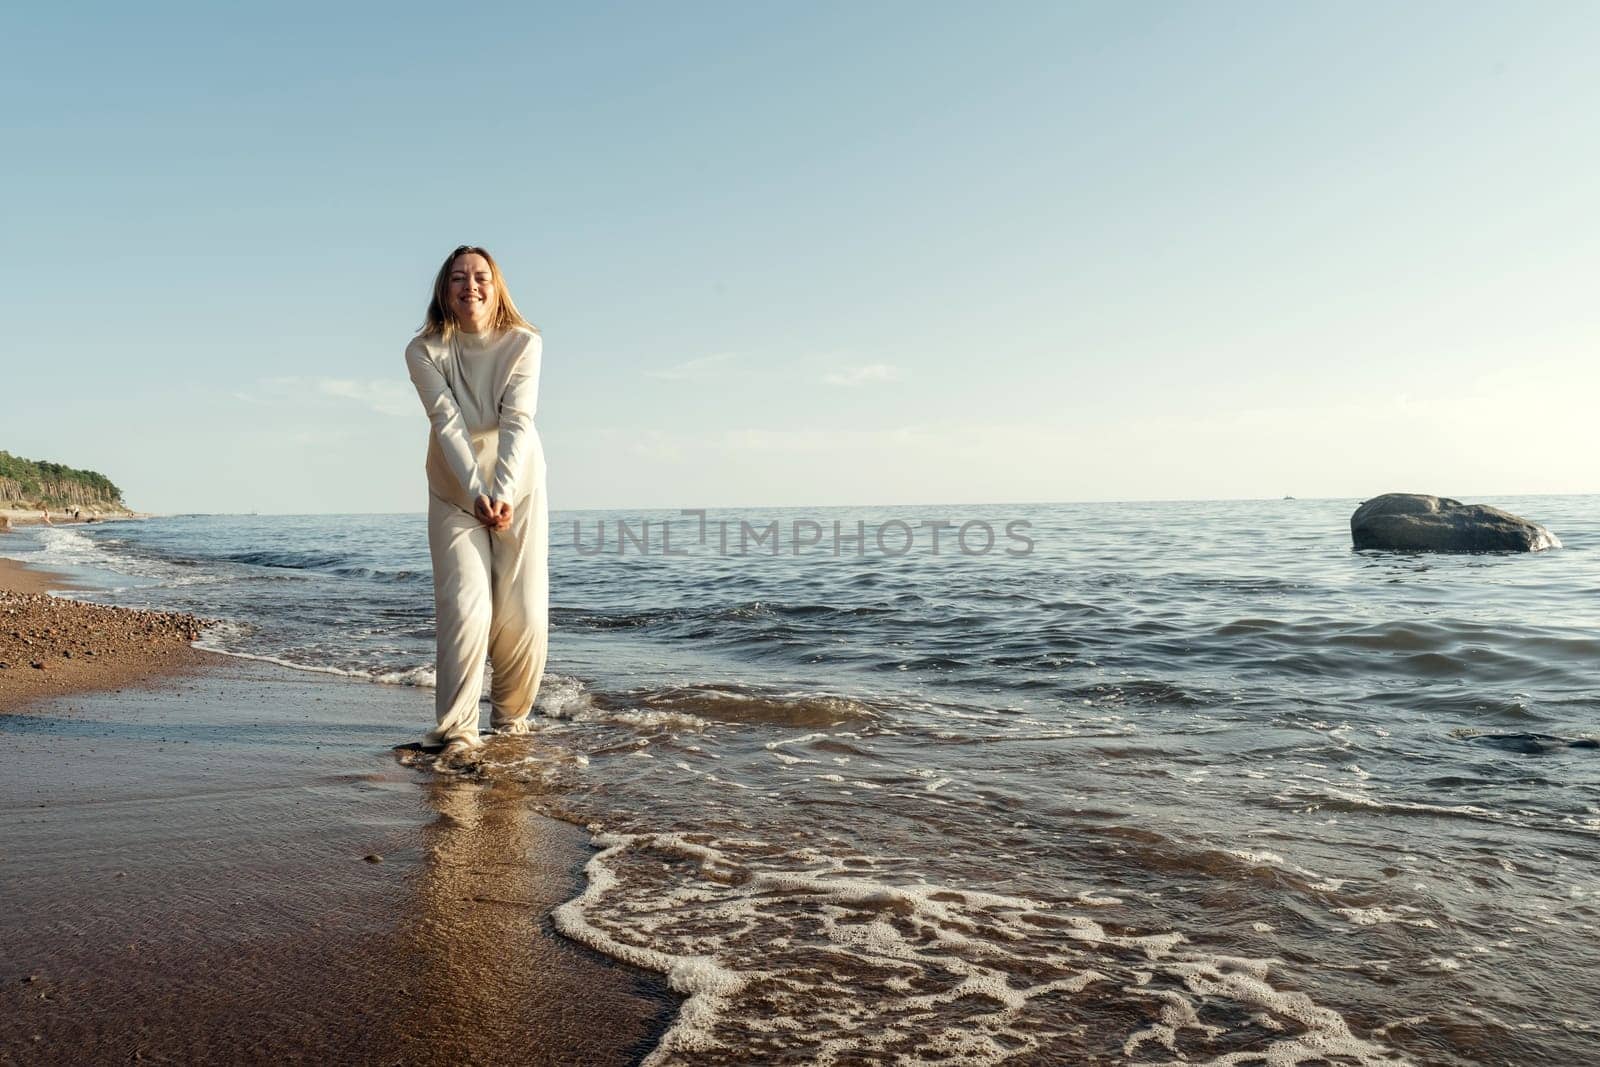 A woman is standing in the water at the beach, with waves gently lapping around her. She gazes out towards the horizon under the clear blue sky.